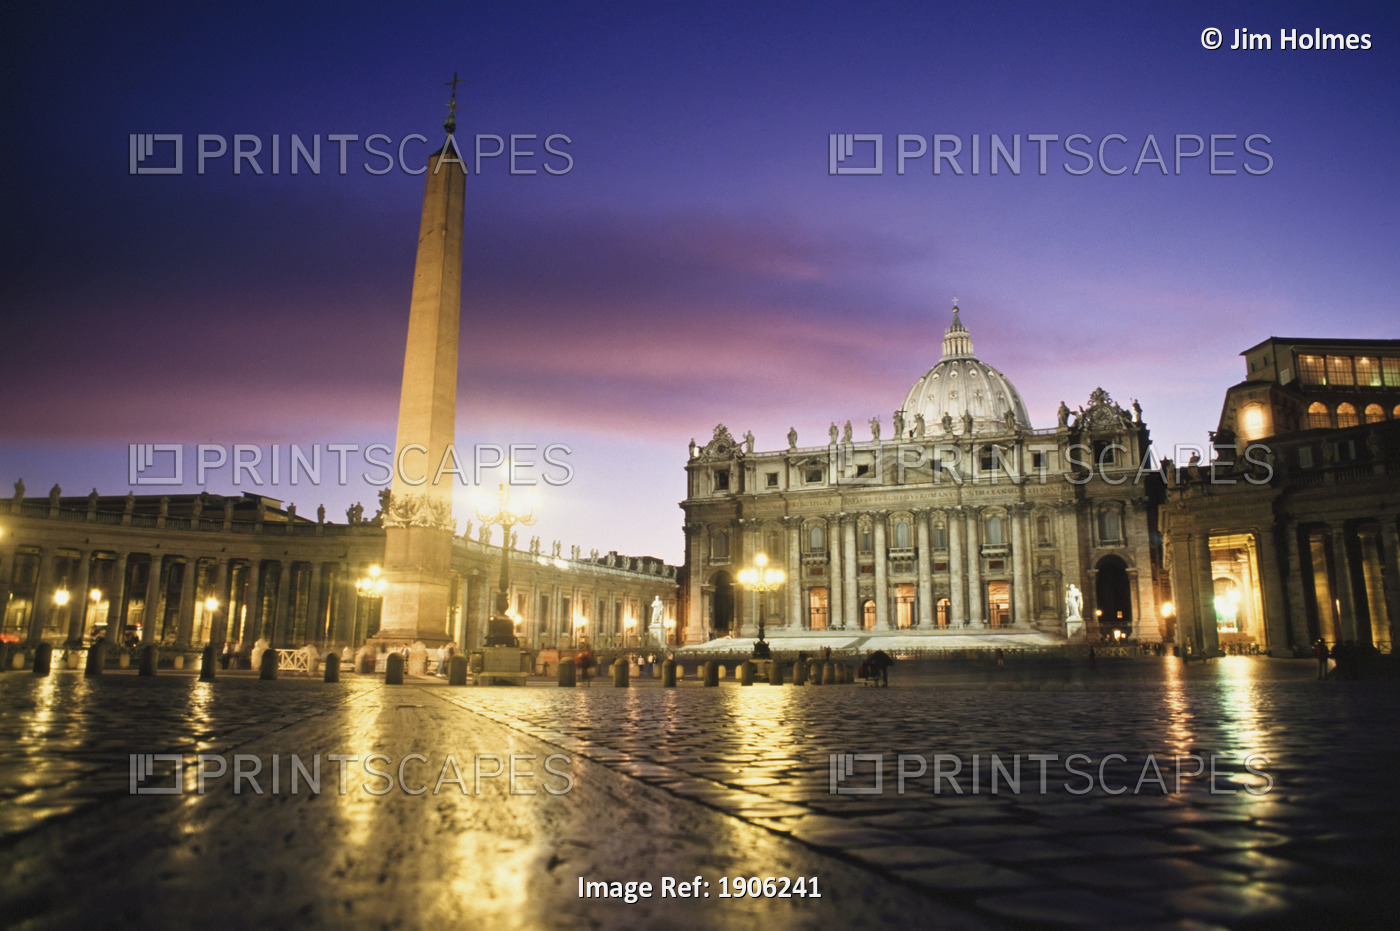 Nightfall At The Square At St. Peter's. The Vatican. Rome,Italy.